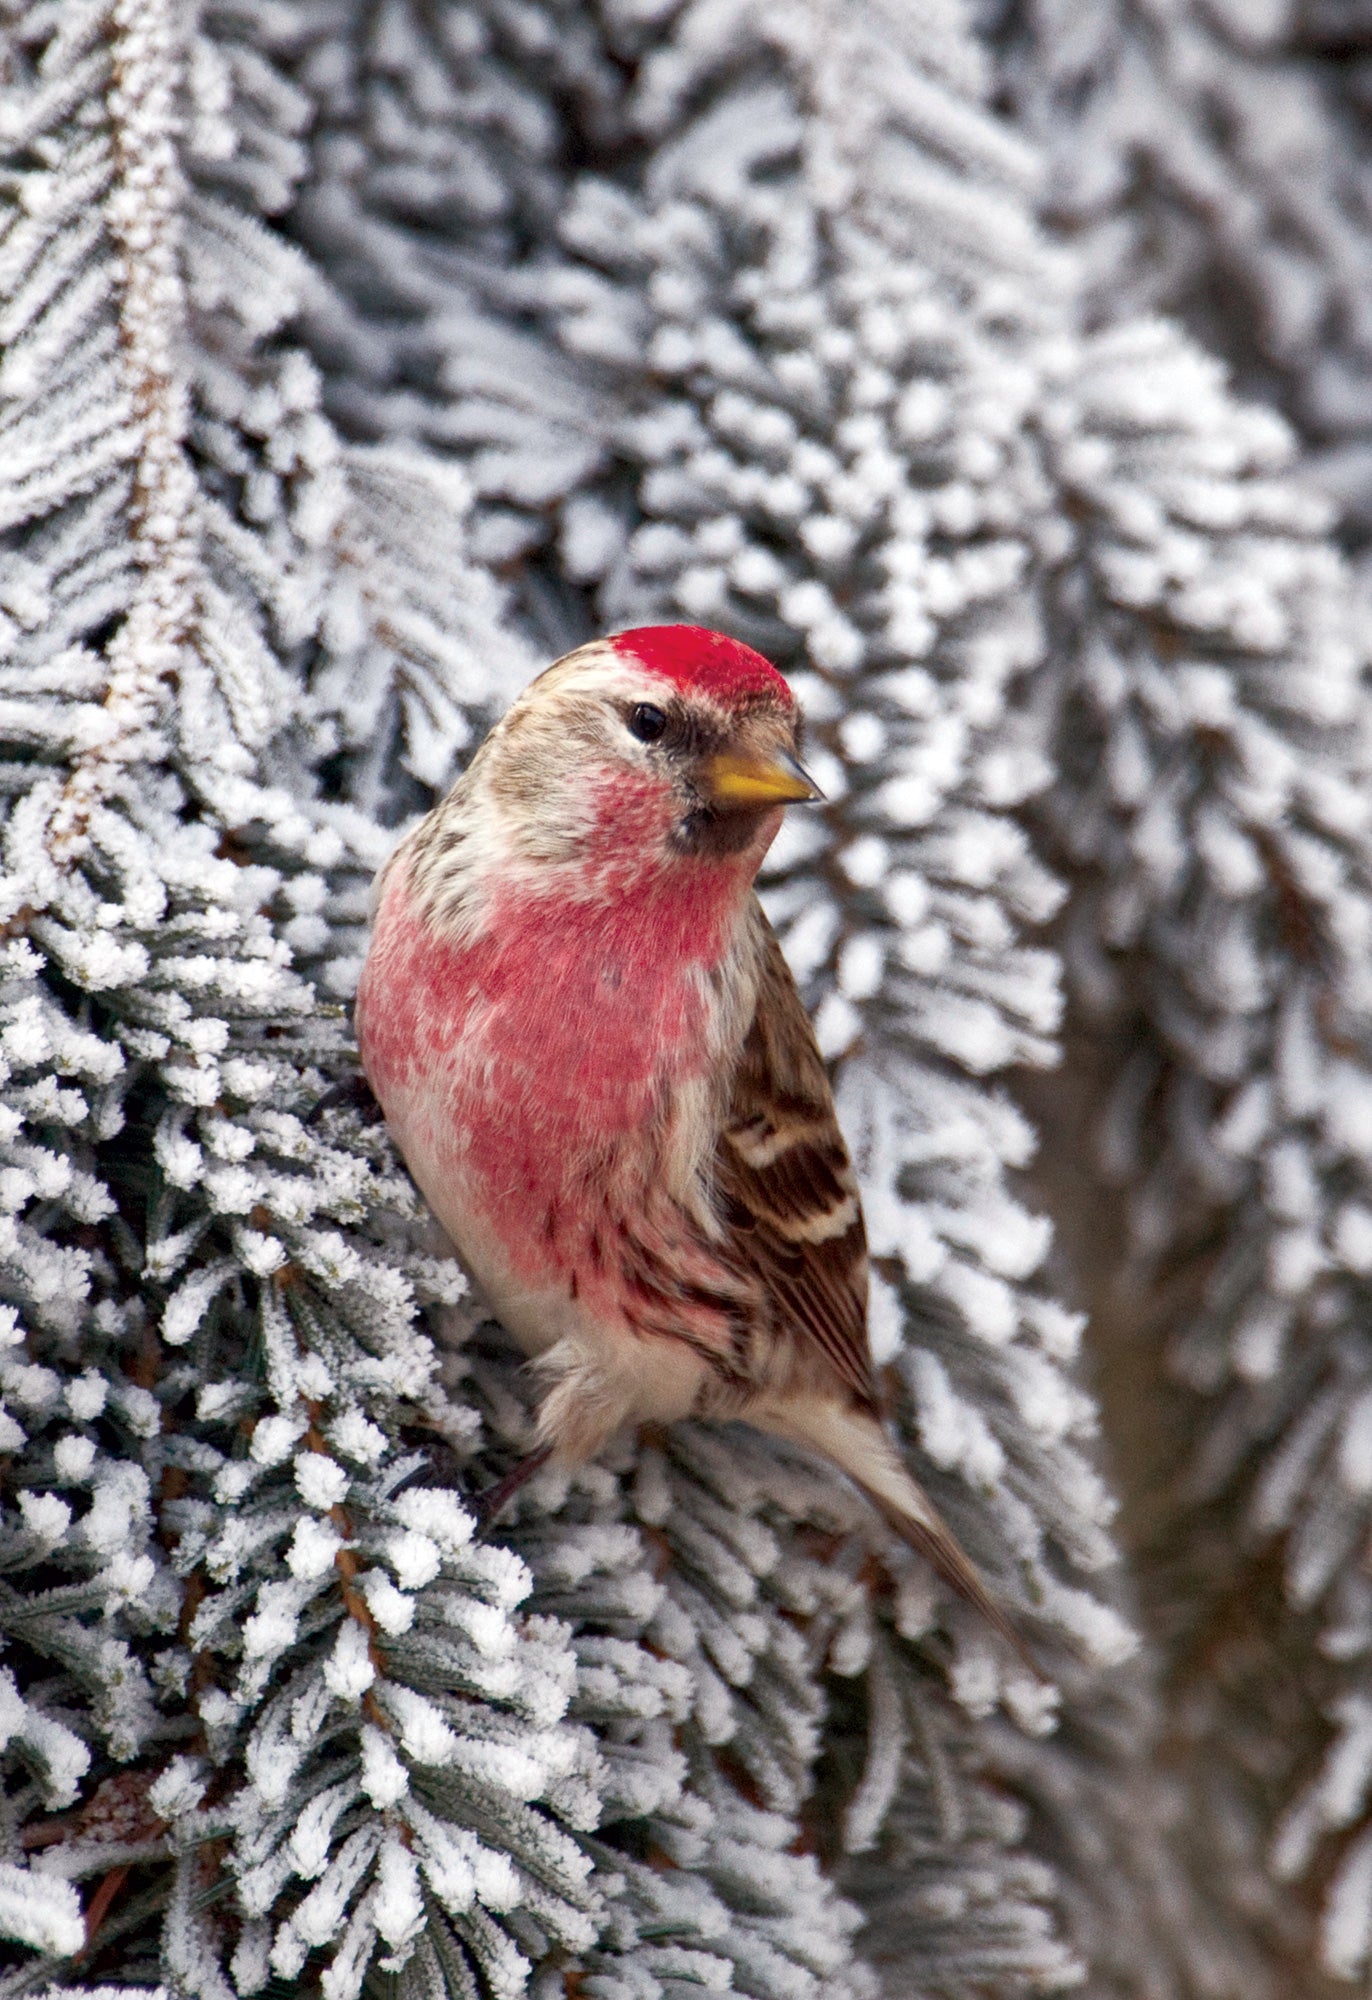 A photo of a redpoll bird gripping on to a snow covered tree branch. End of image description.